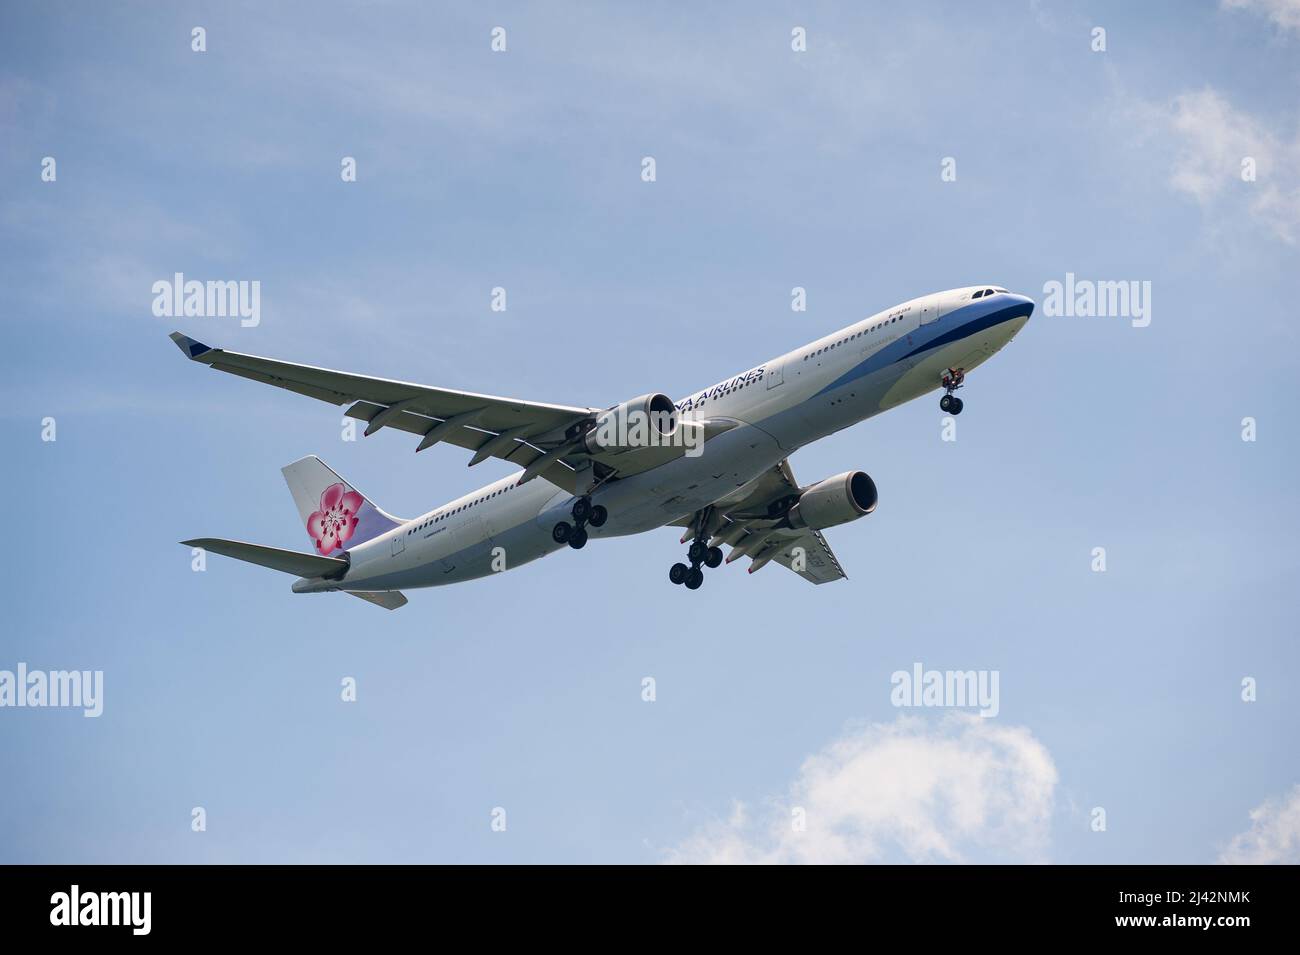 29.11.2021, Singapore, Republic of Singapore, Asia - China Airlines Airbus A330-300 passenger aircraft approaches Changi Airport for landing. Stock Photo